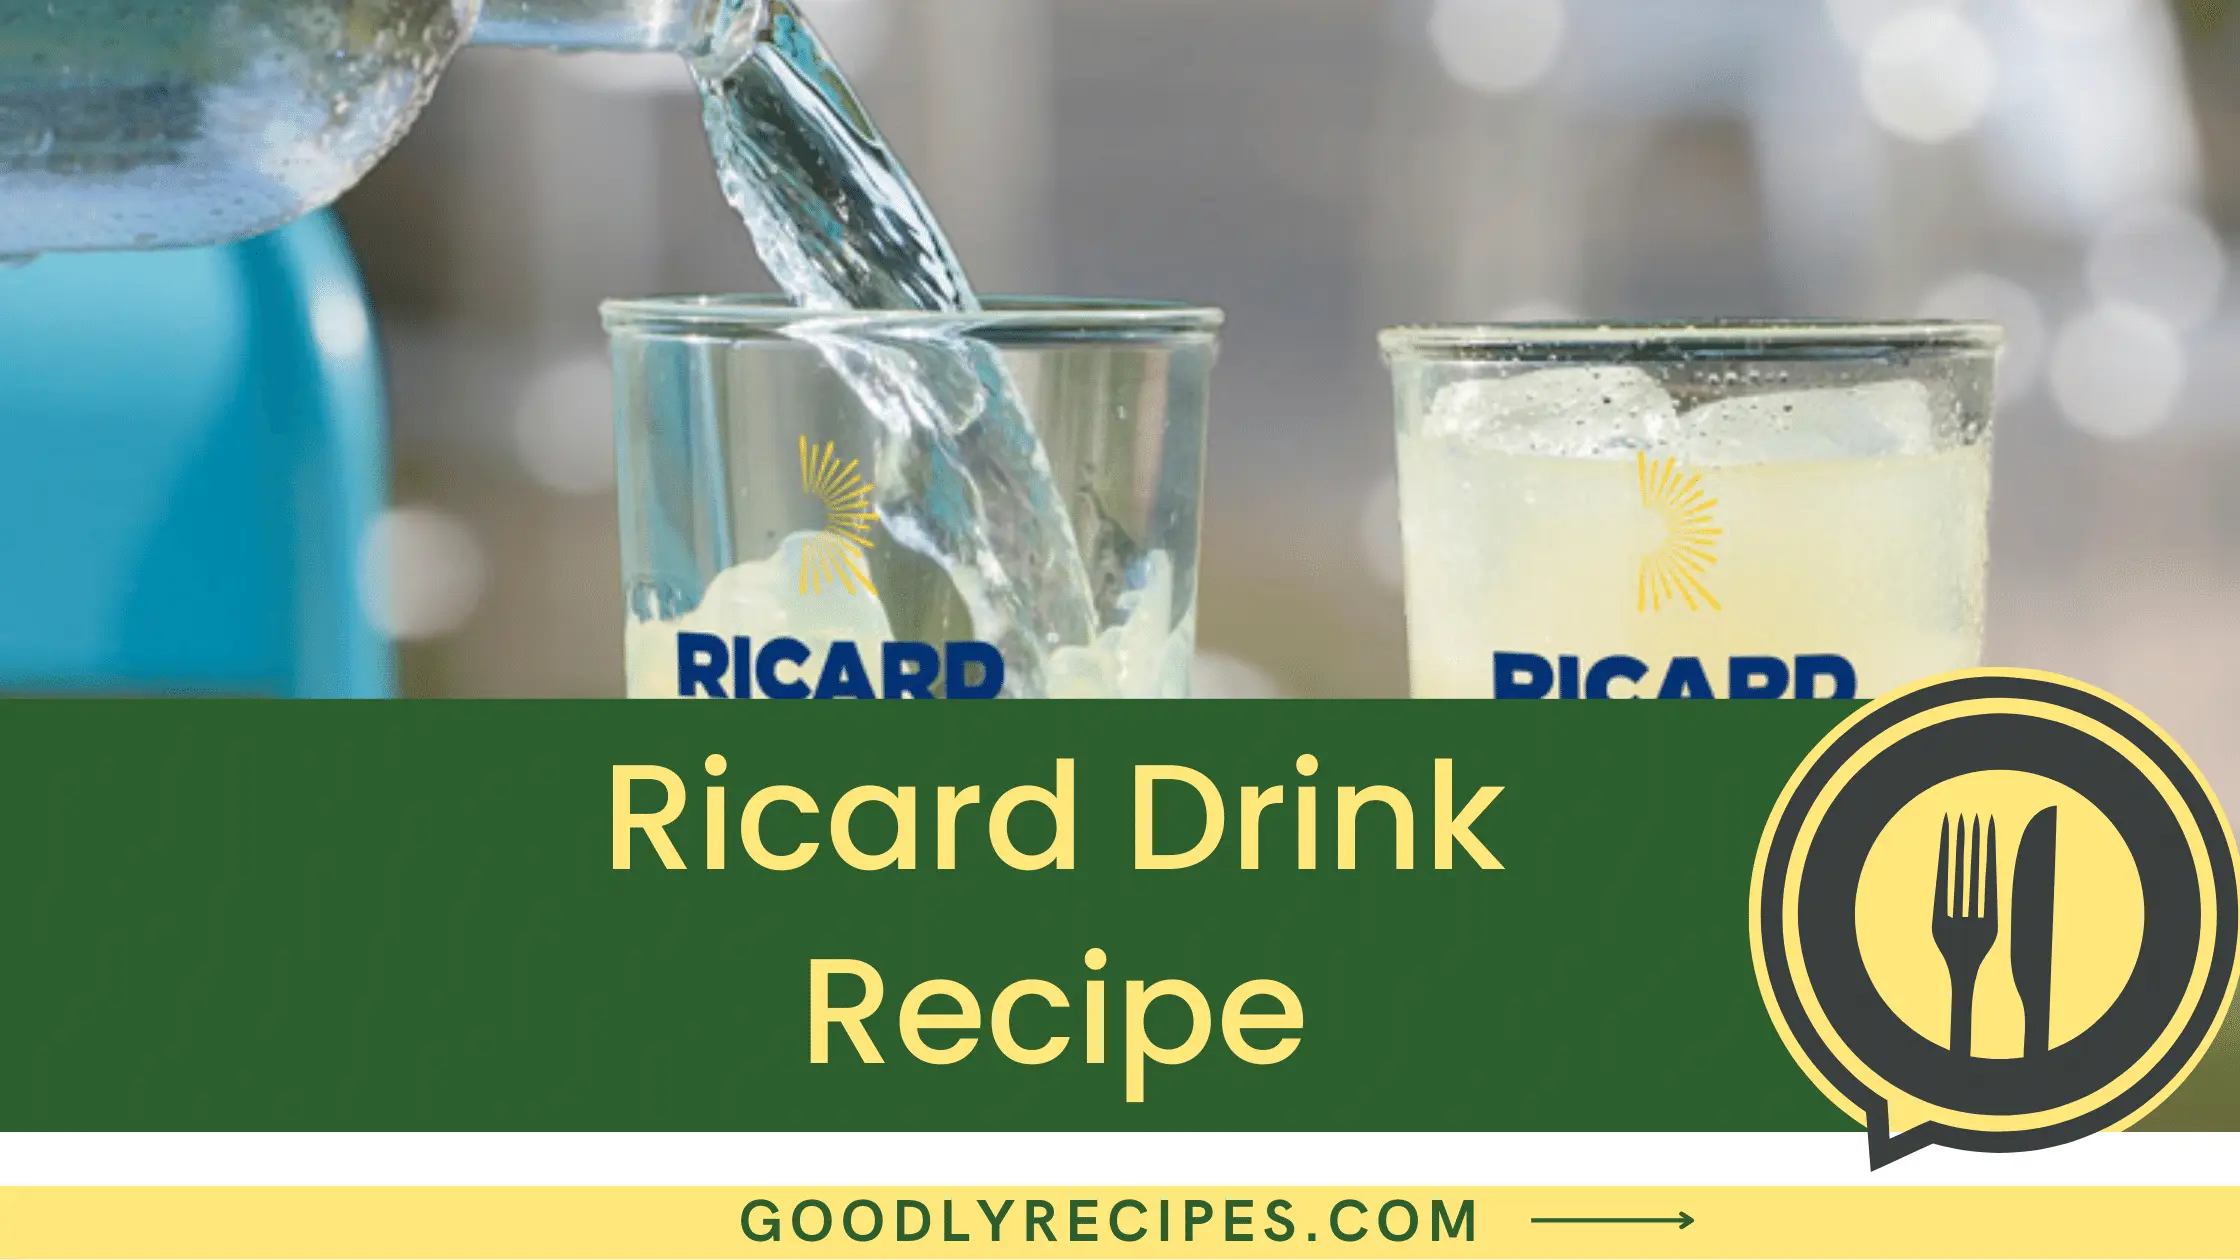 What is Ricard Drink?